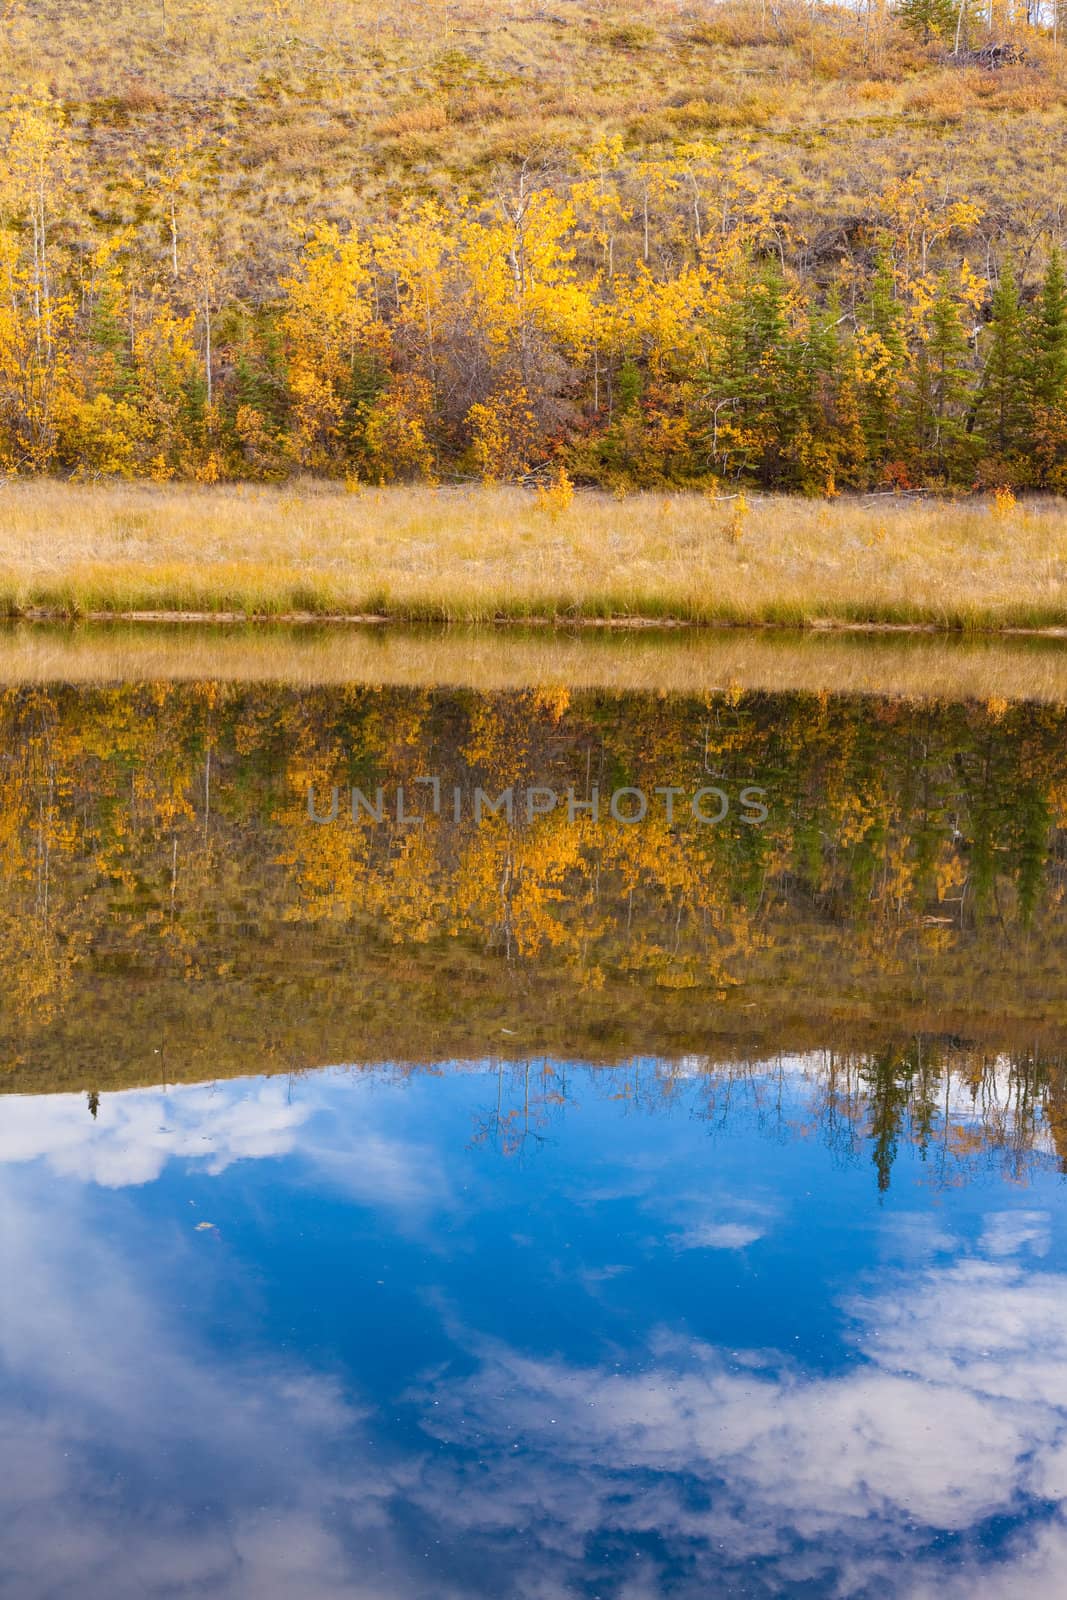 Fall in Yukon Territory, Canada, reflections on water surface by PiLens